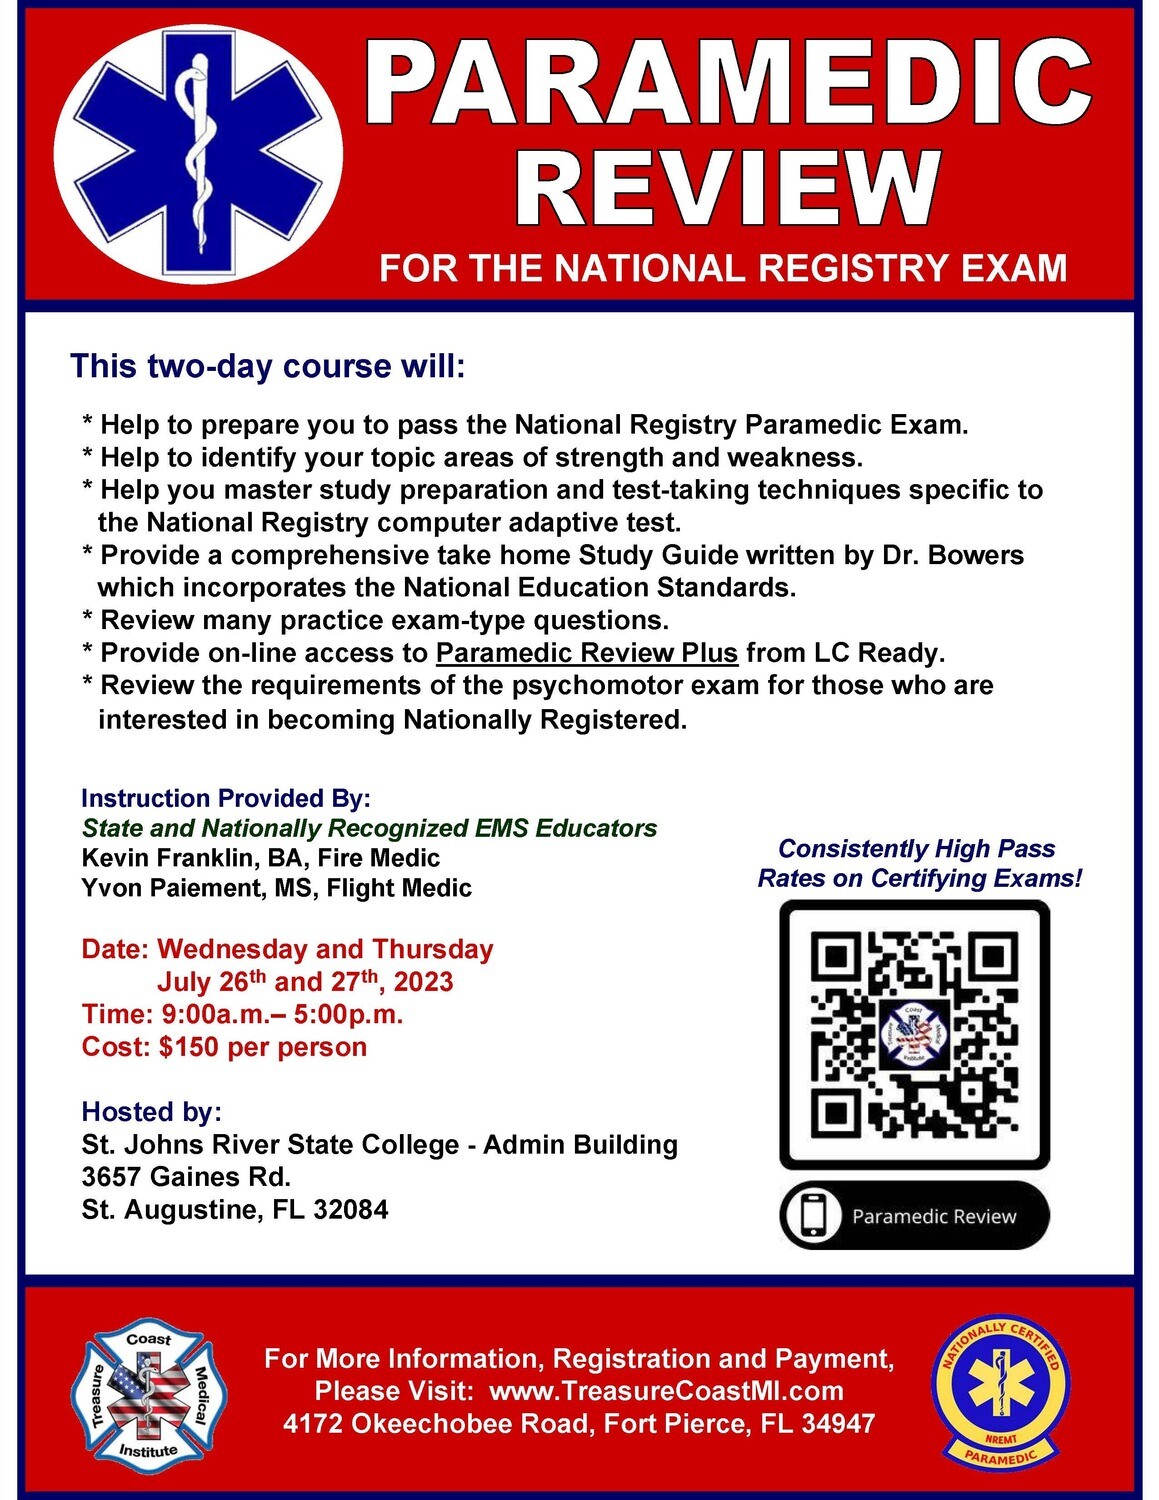 NREMT Paramedic Exam Review July 26th and 27th St. Augustine